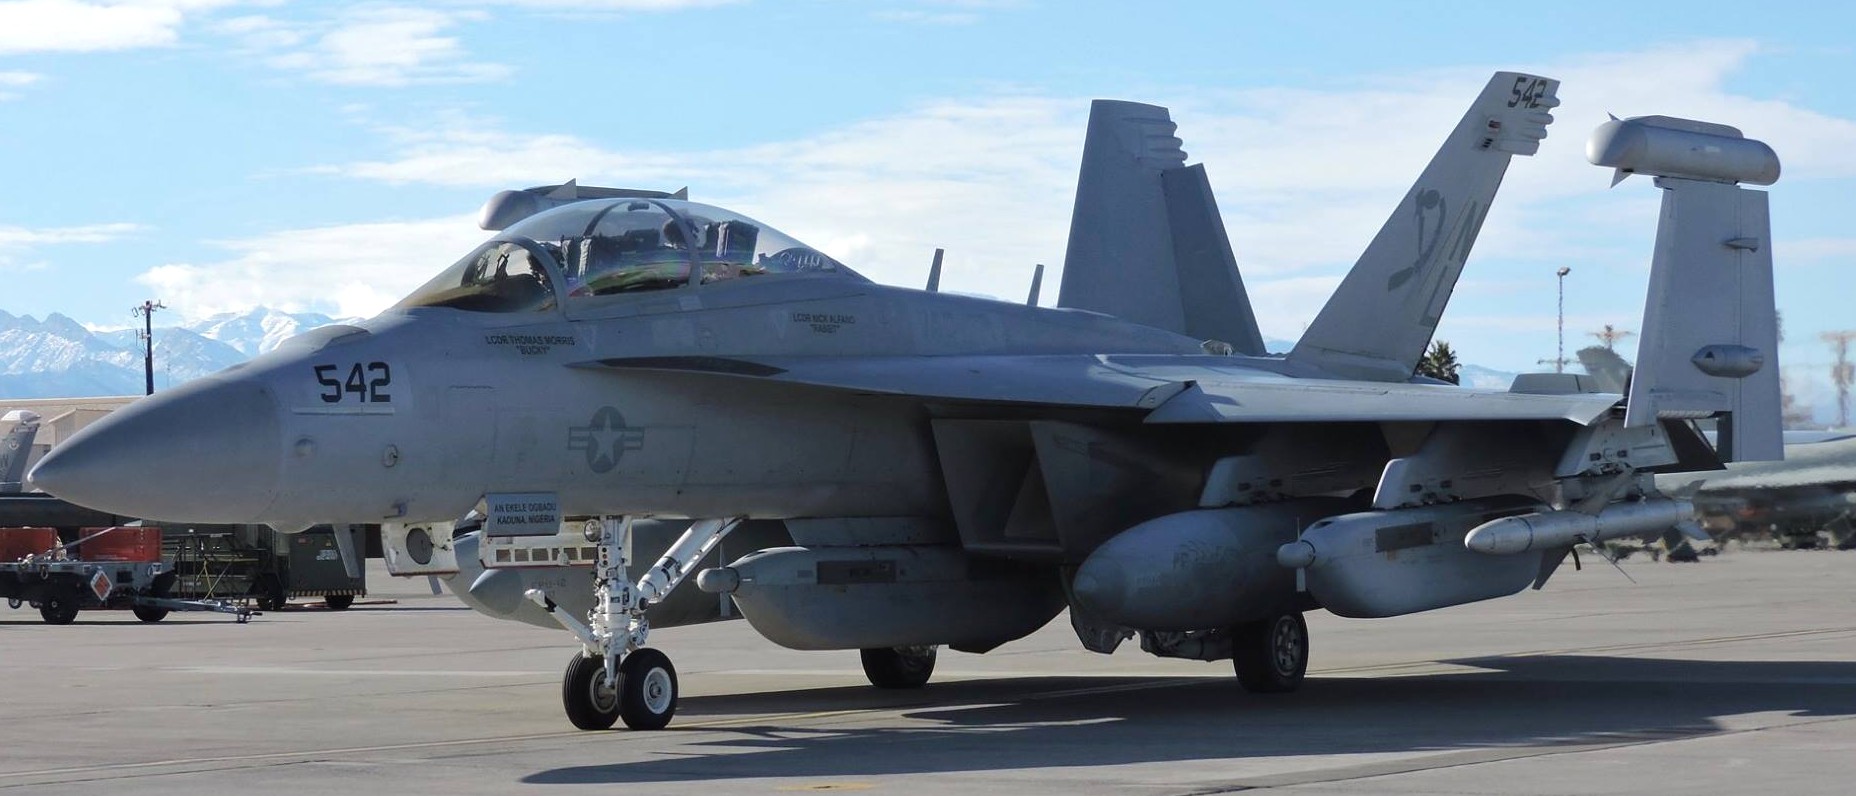 vaq-132 scorpions electronic attack squadron vaqron us navy boeing ea-18g growler exercise red flag nellis afb nevada 27